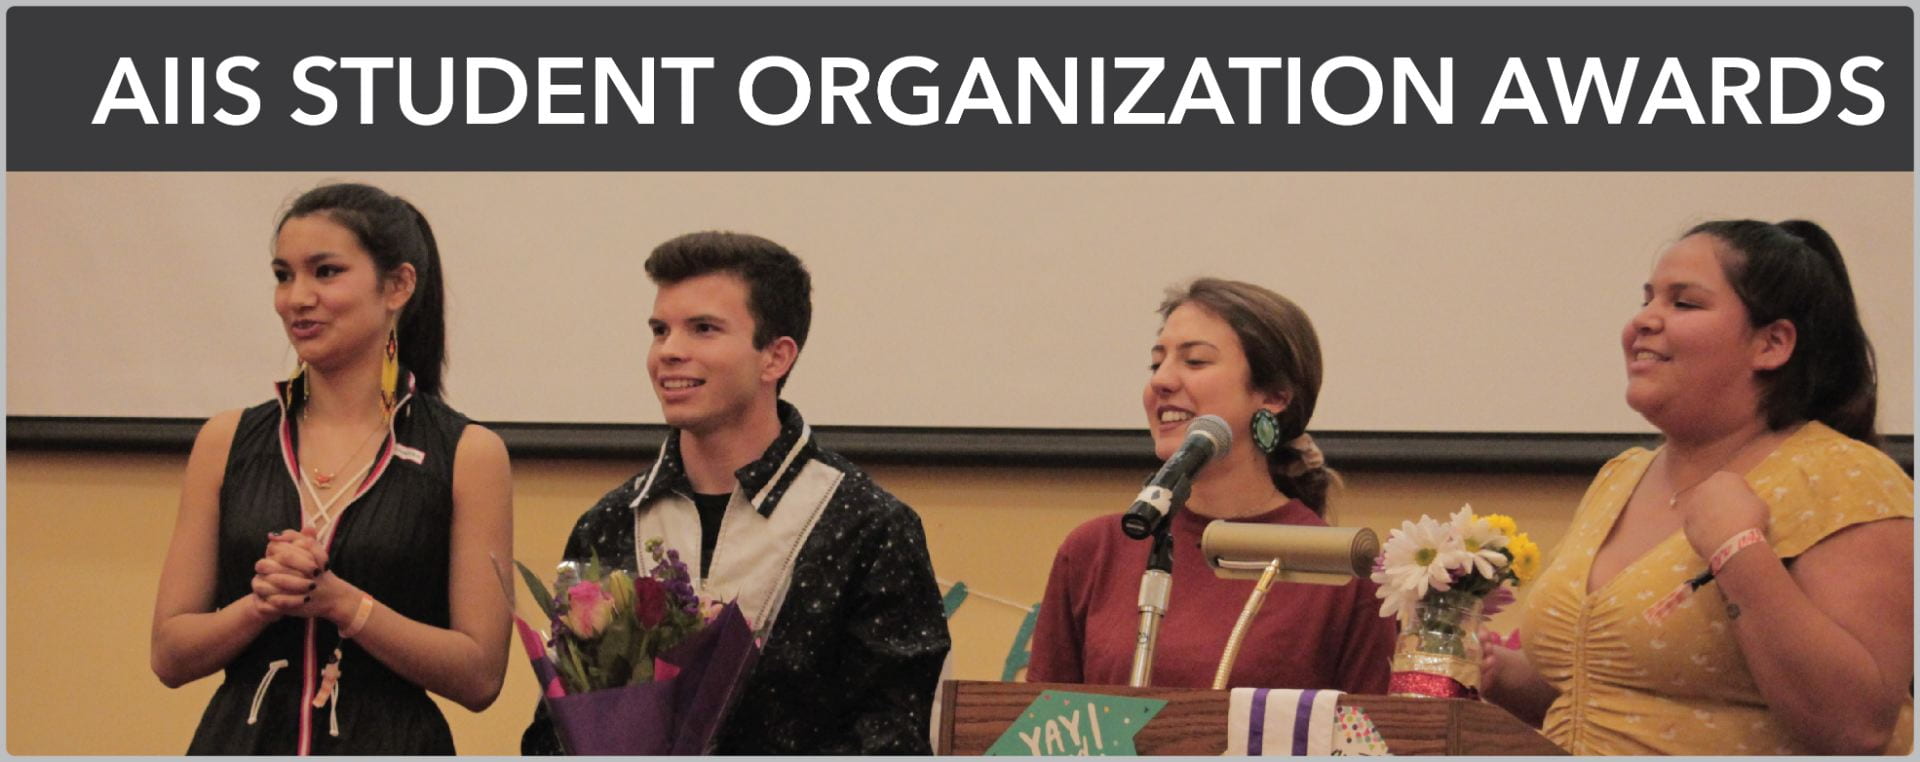 AIIS student organization awards banner with link to page